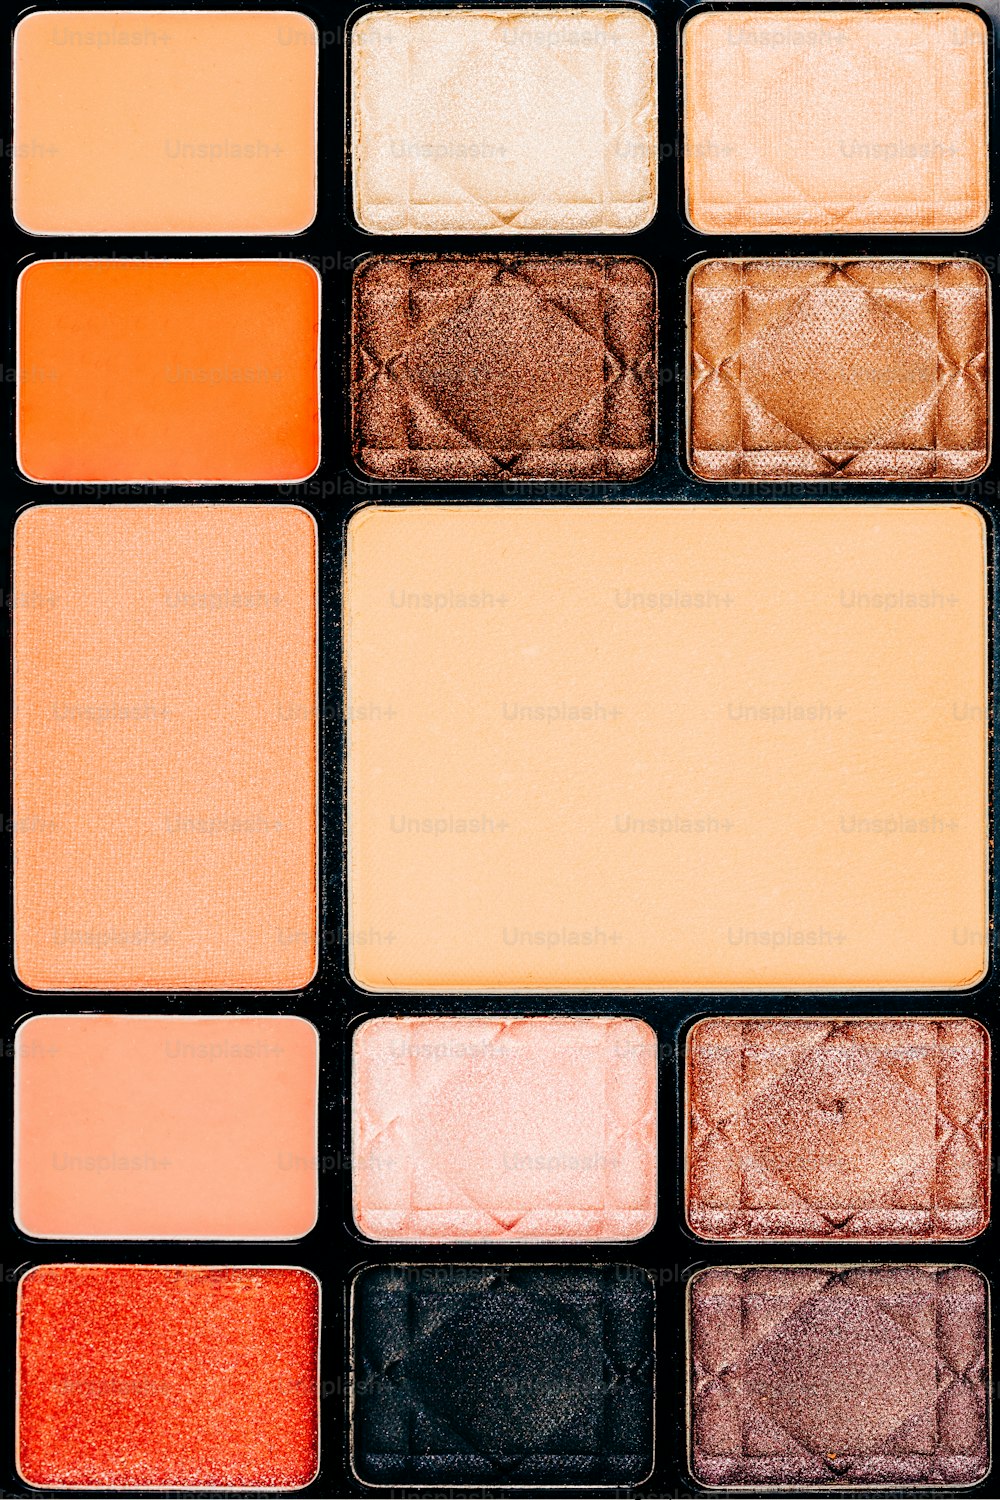 a close up of a palette of eyeshades